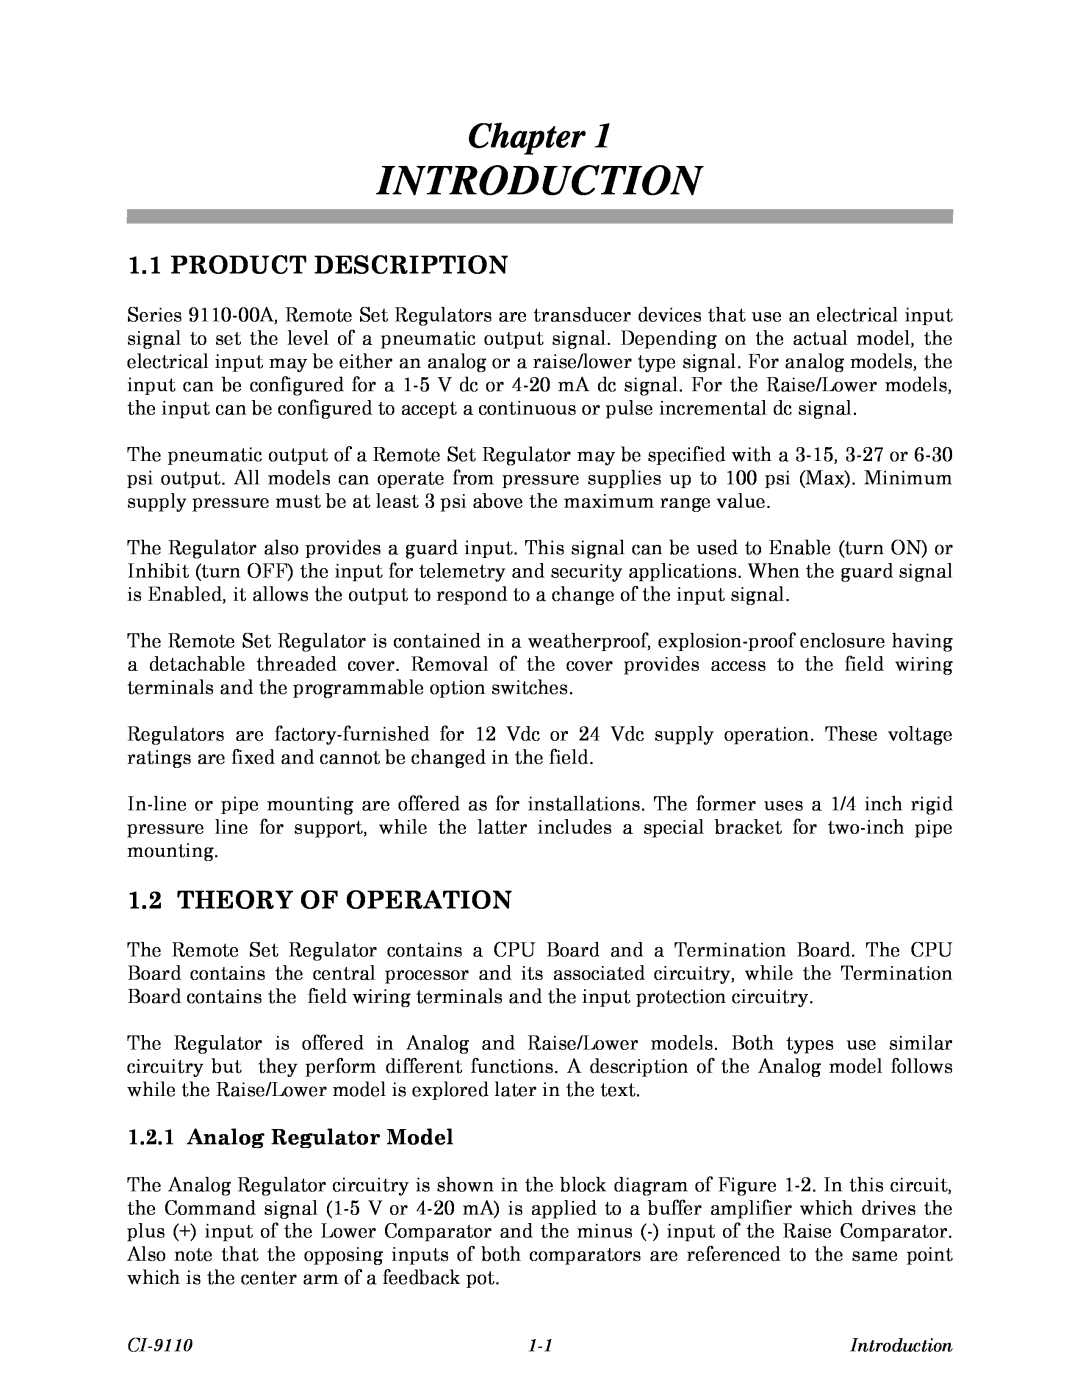 Emerson Process Management 9110-00A, Series 9110, CI-9110 Introduction, Chapter, Product Description, Theory Of Operation 